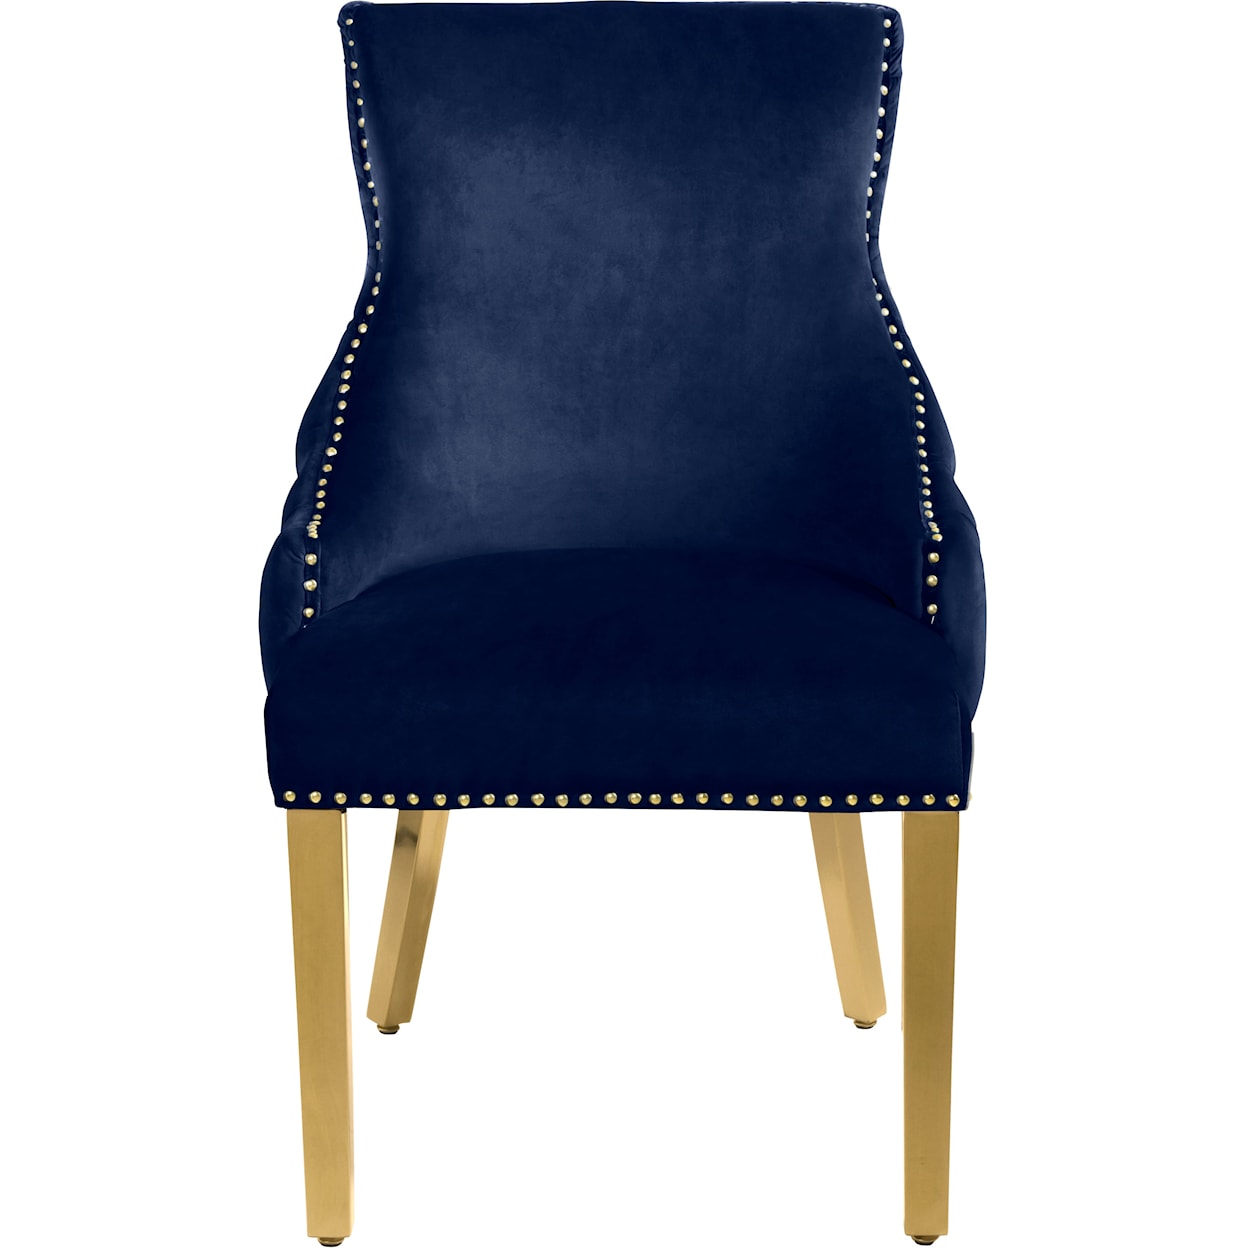 Meridian Furniture Tuft Dining Chair